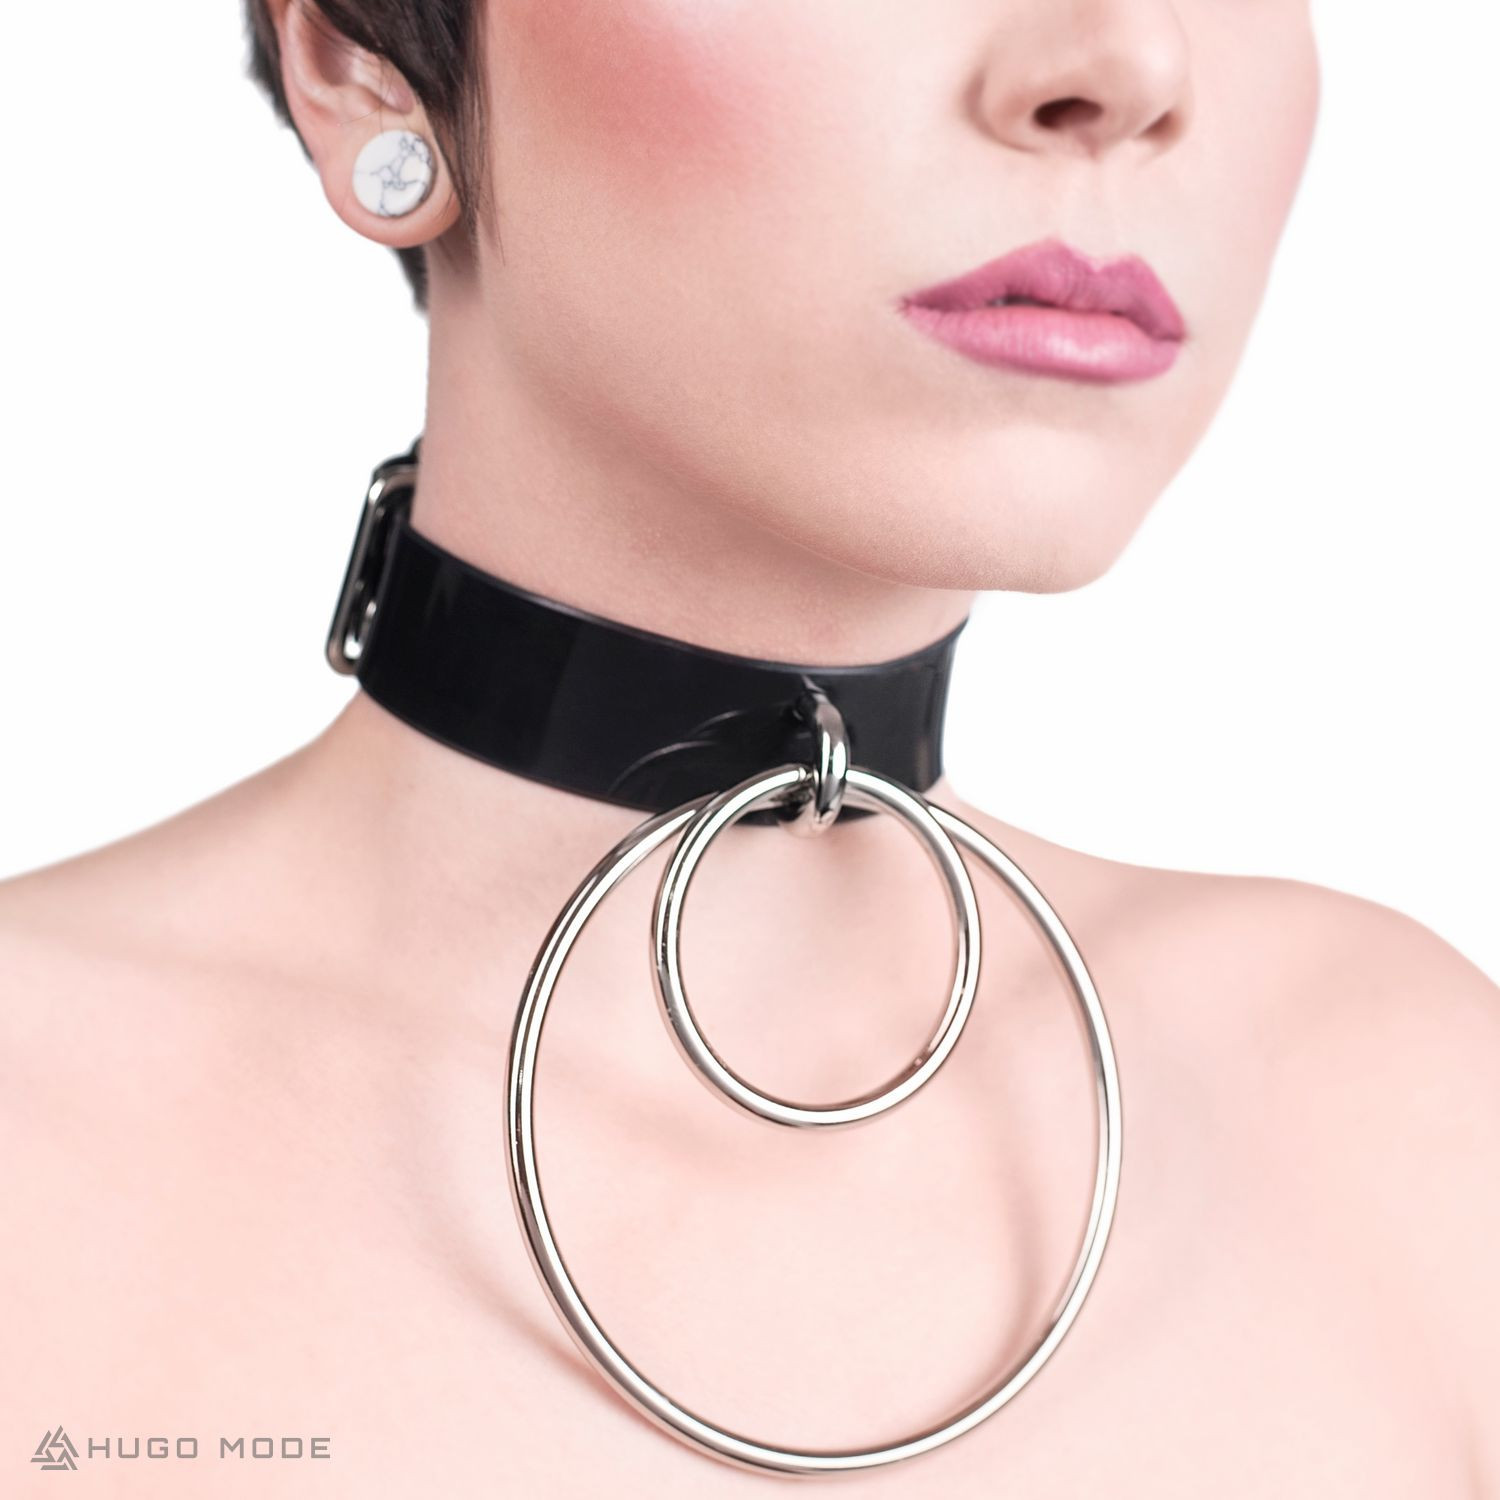 A neck choker decorated with huge pendant rings.